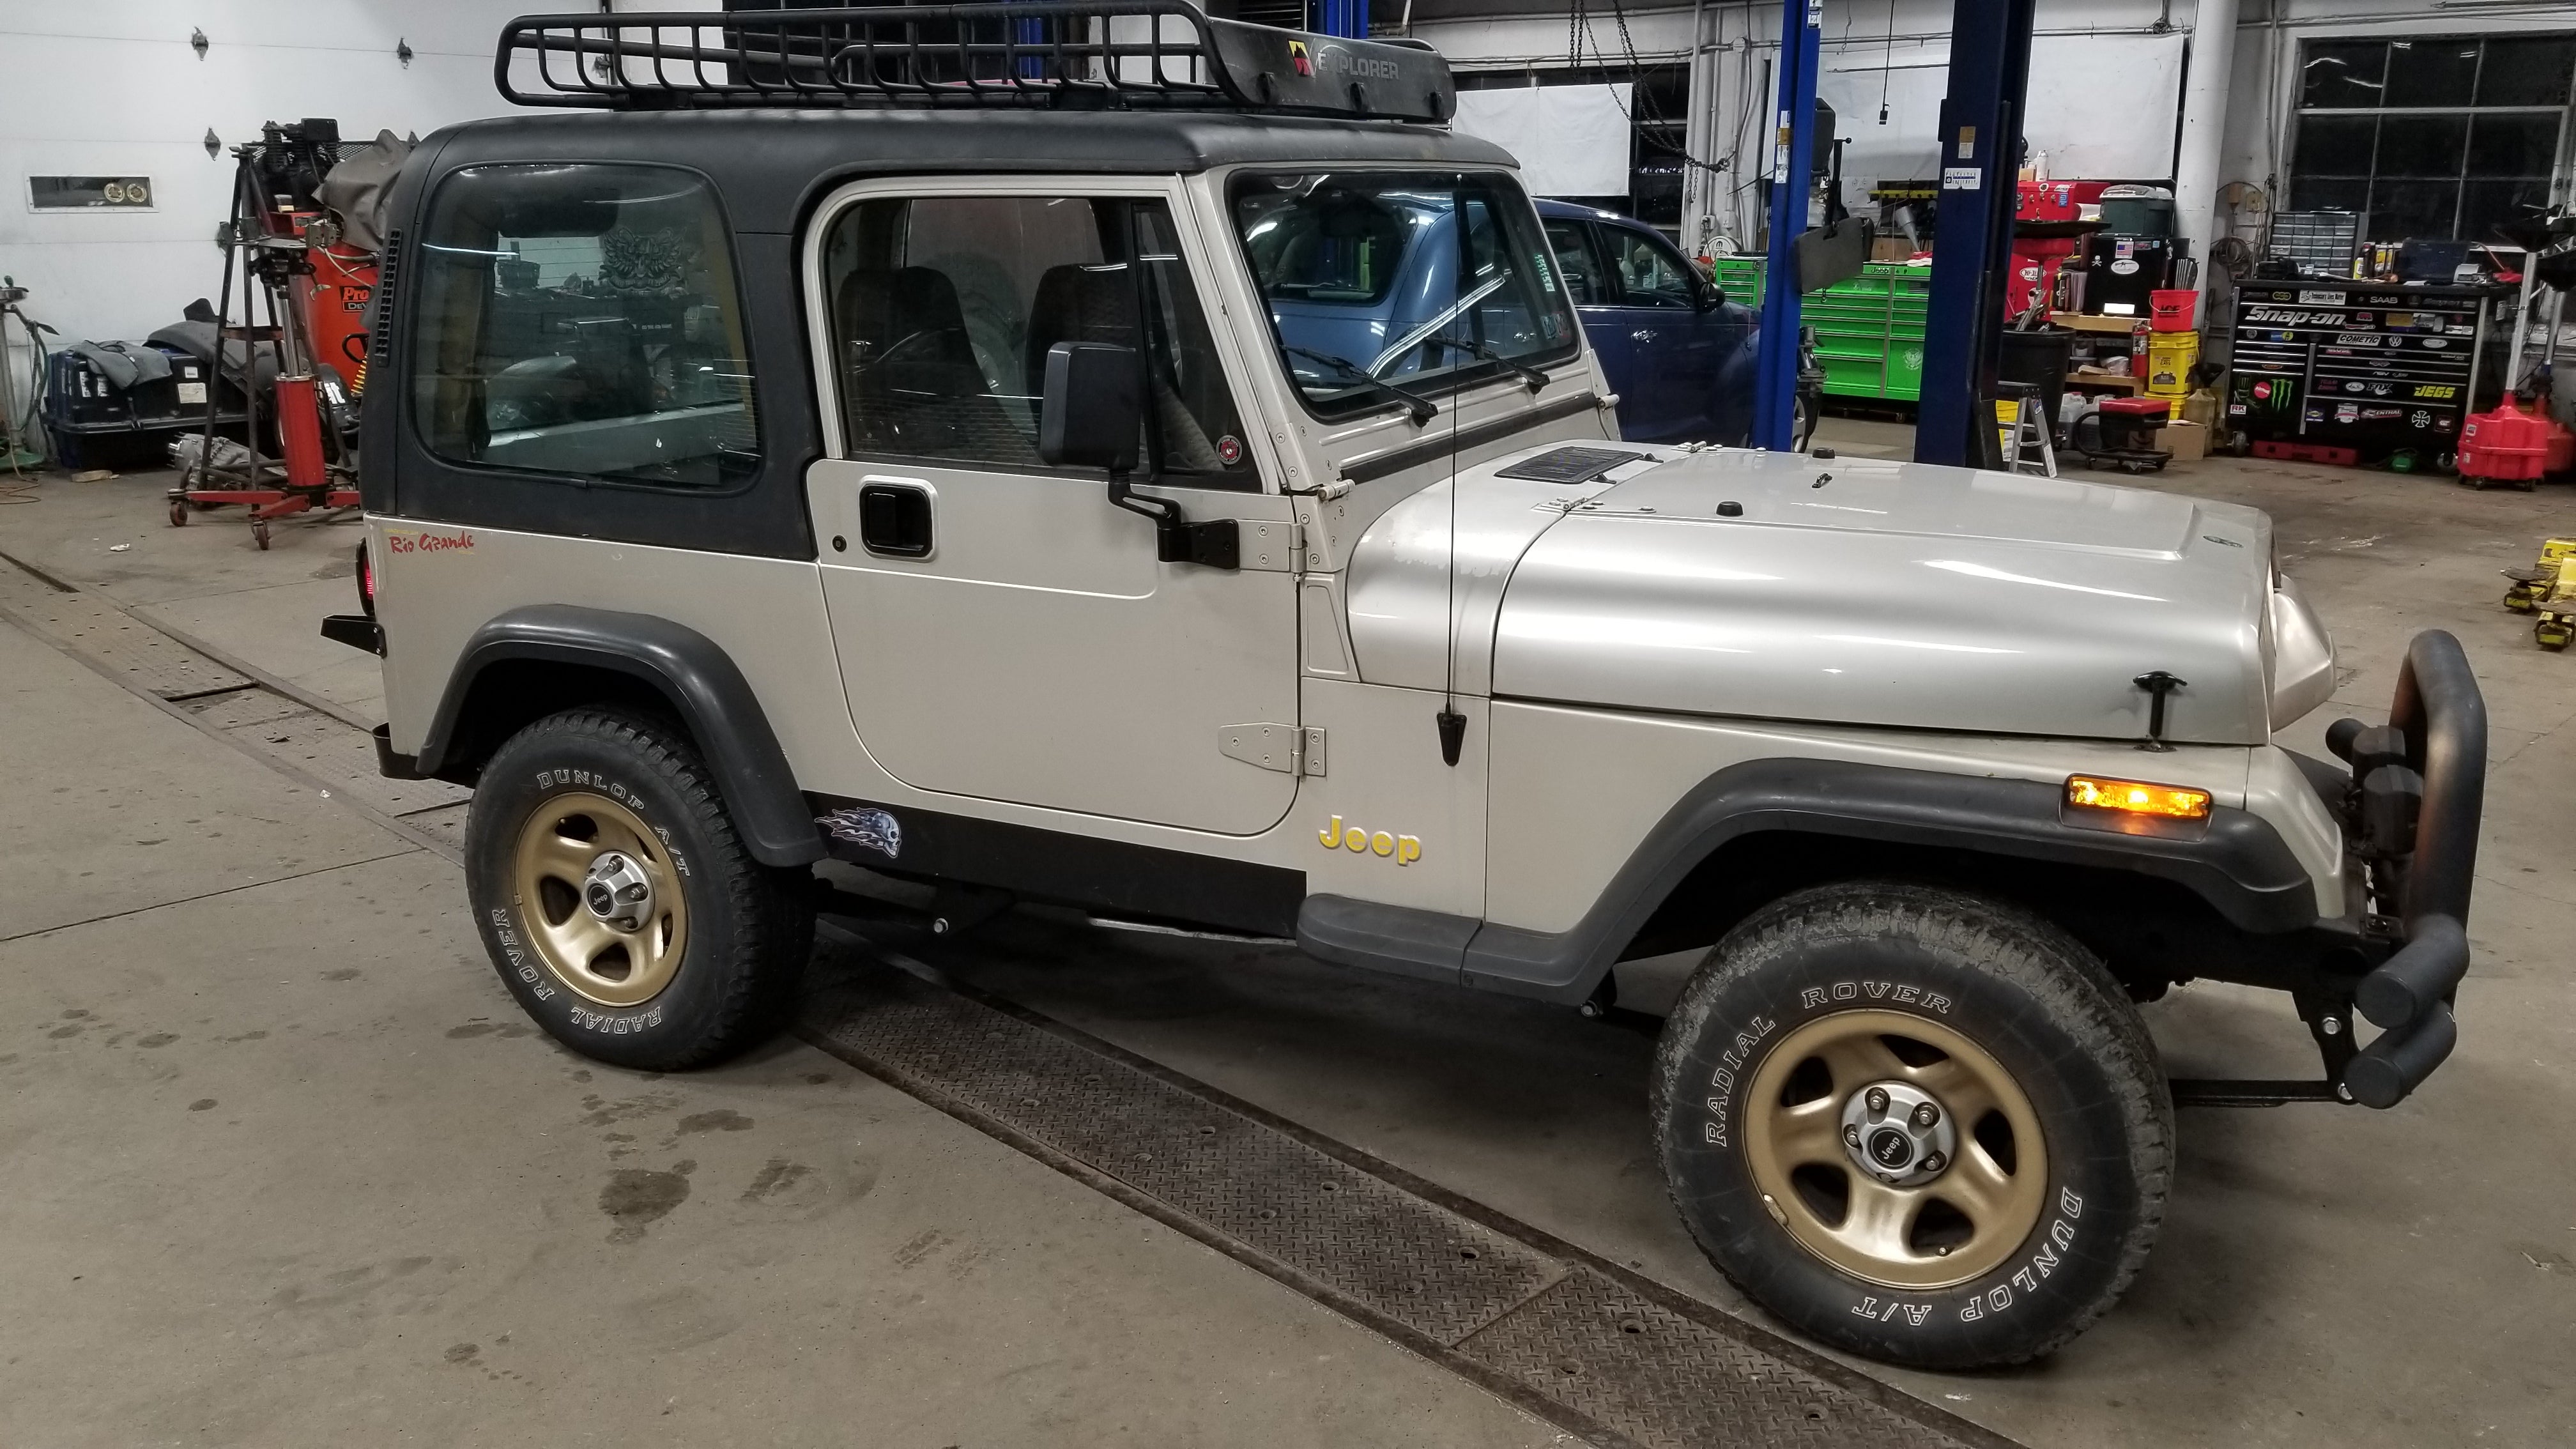 I Bought an $800 Rio Grande as my First Jeep...Why Must I Do These Things?  | Jeep Wrangler Forum